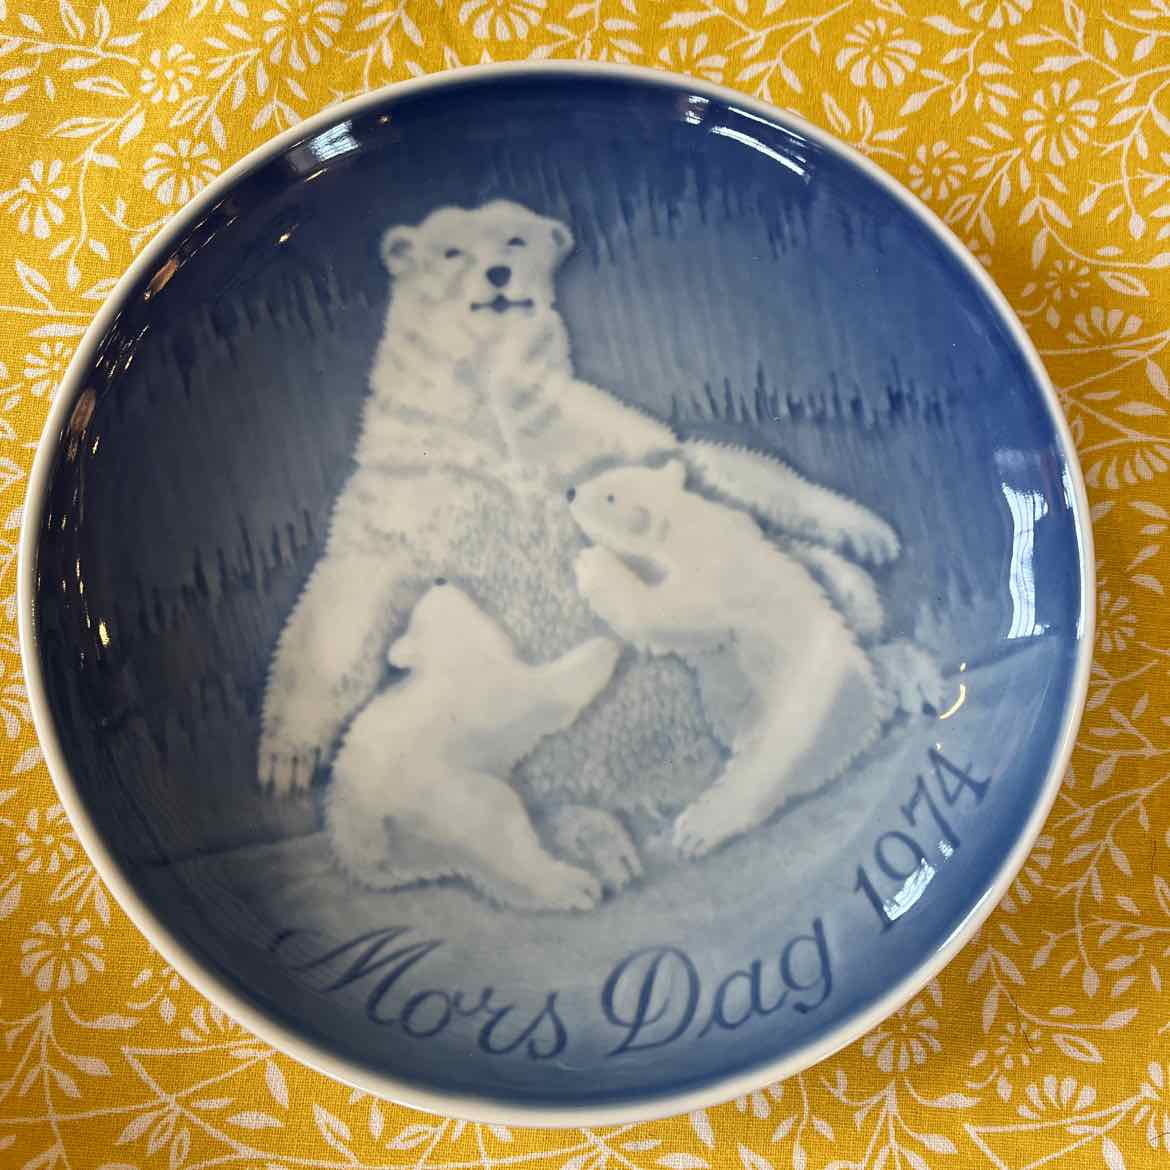 B & G Mothers' Day Plate 1974